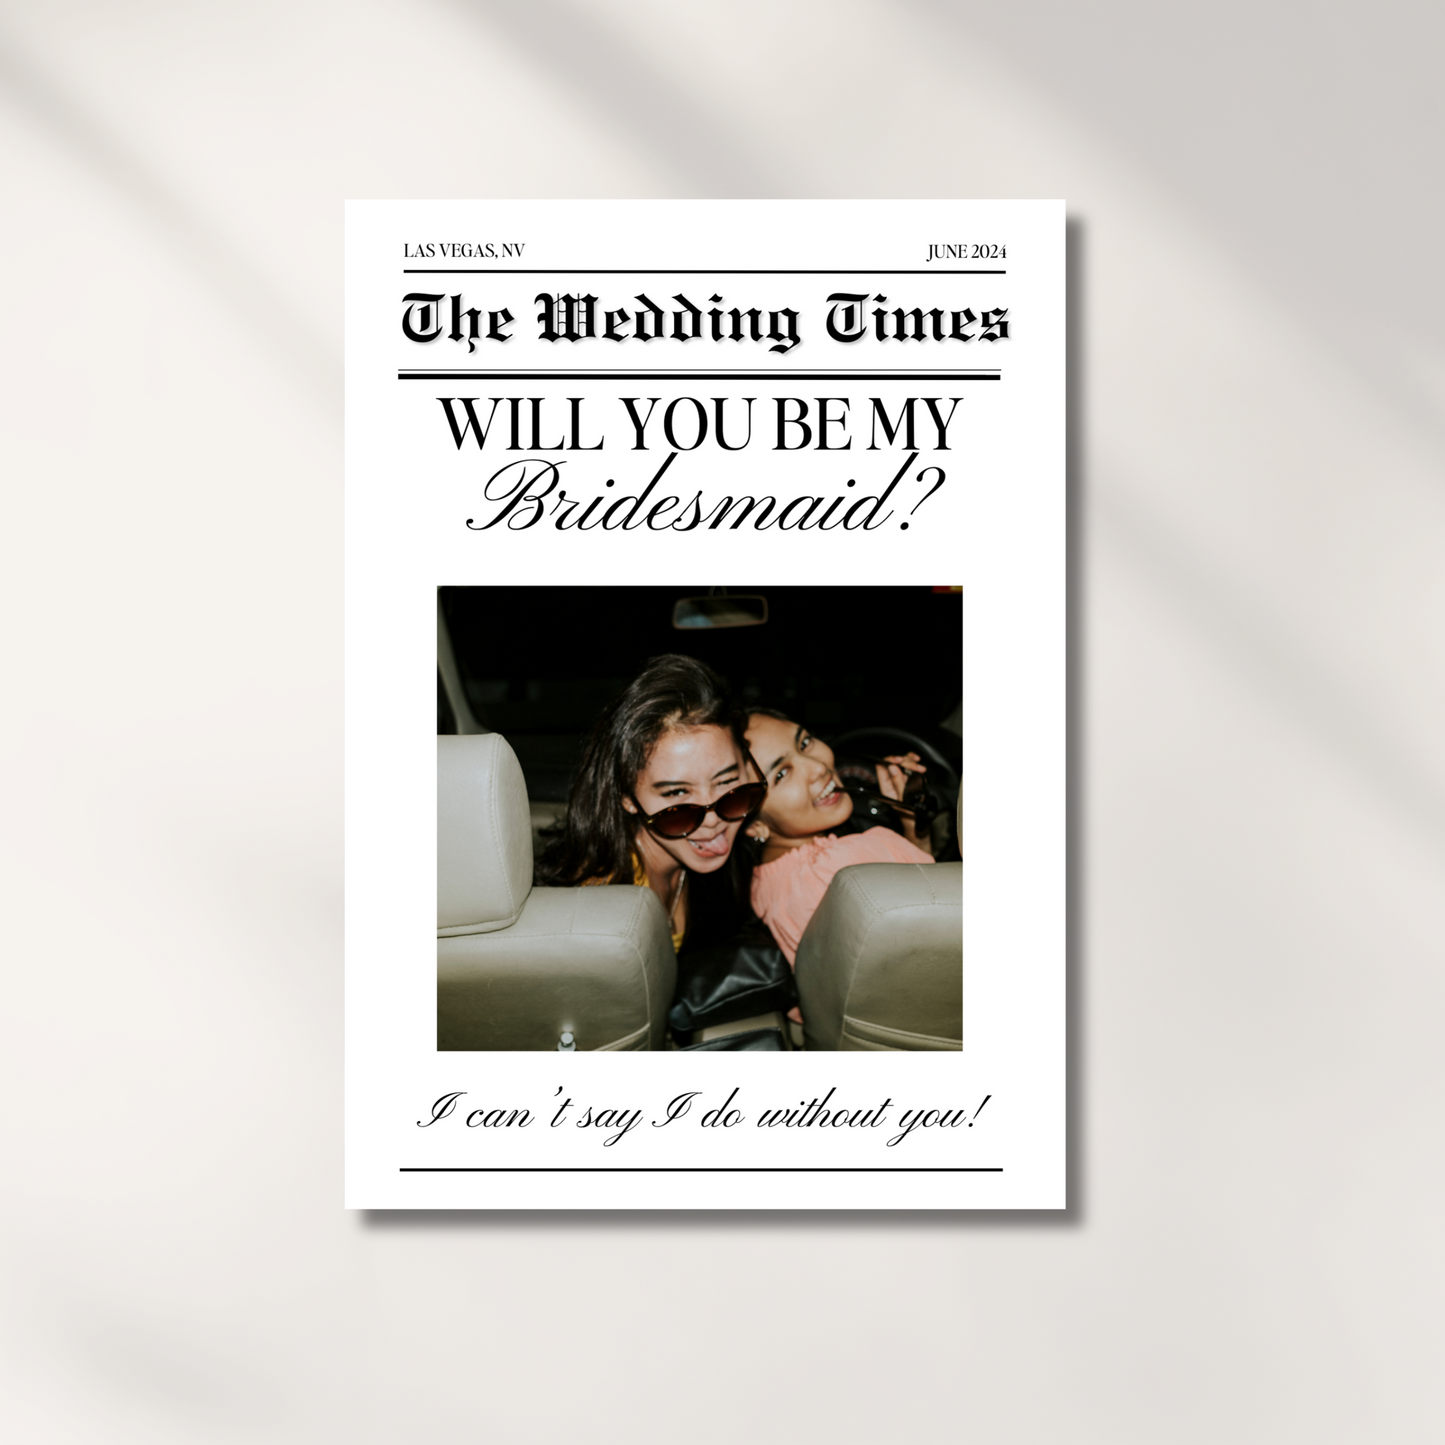 Bridesmaid Proposal Newspaper Photo Card, Printable Will You Be My Bridesmaid Newspaper Template, Maid of Honor Card, Canva Template